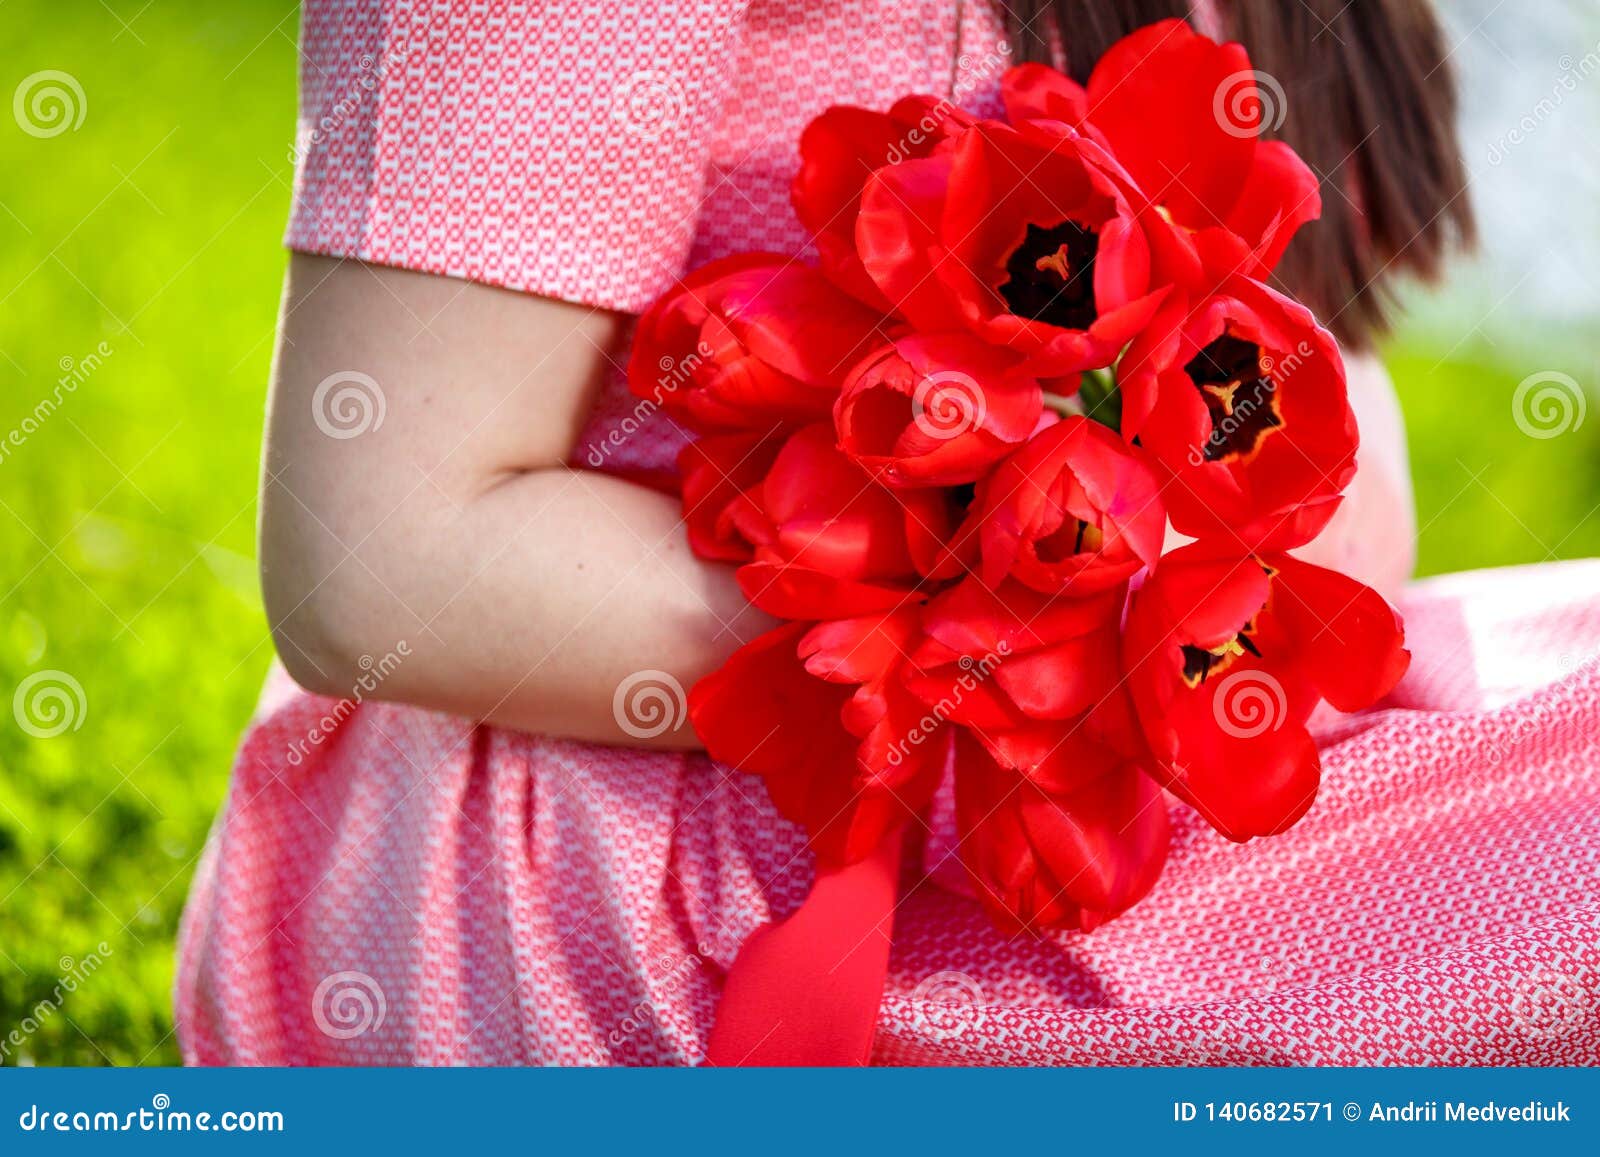 pink dress with red flowers